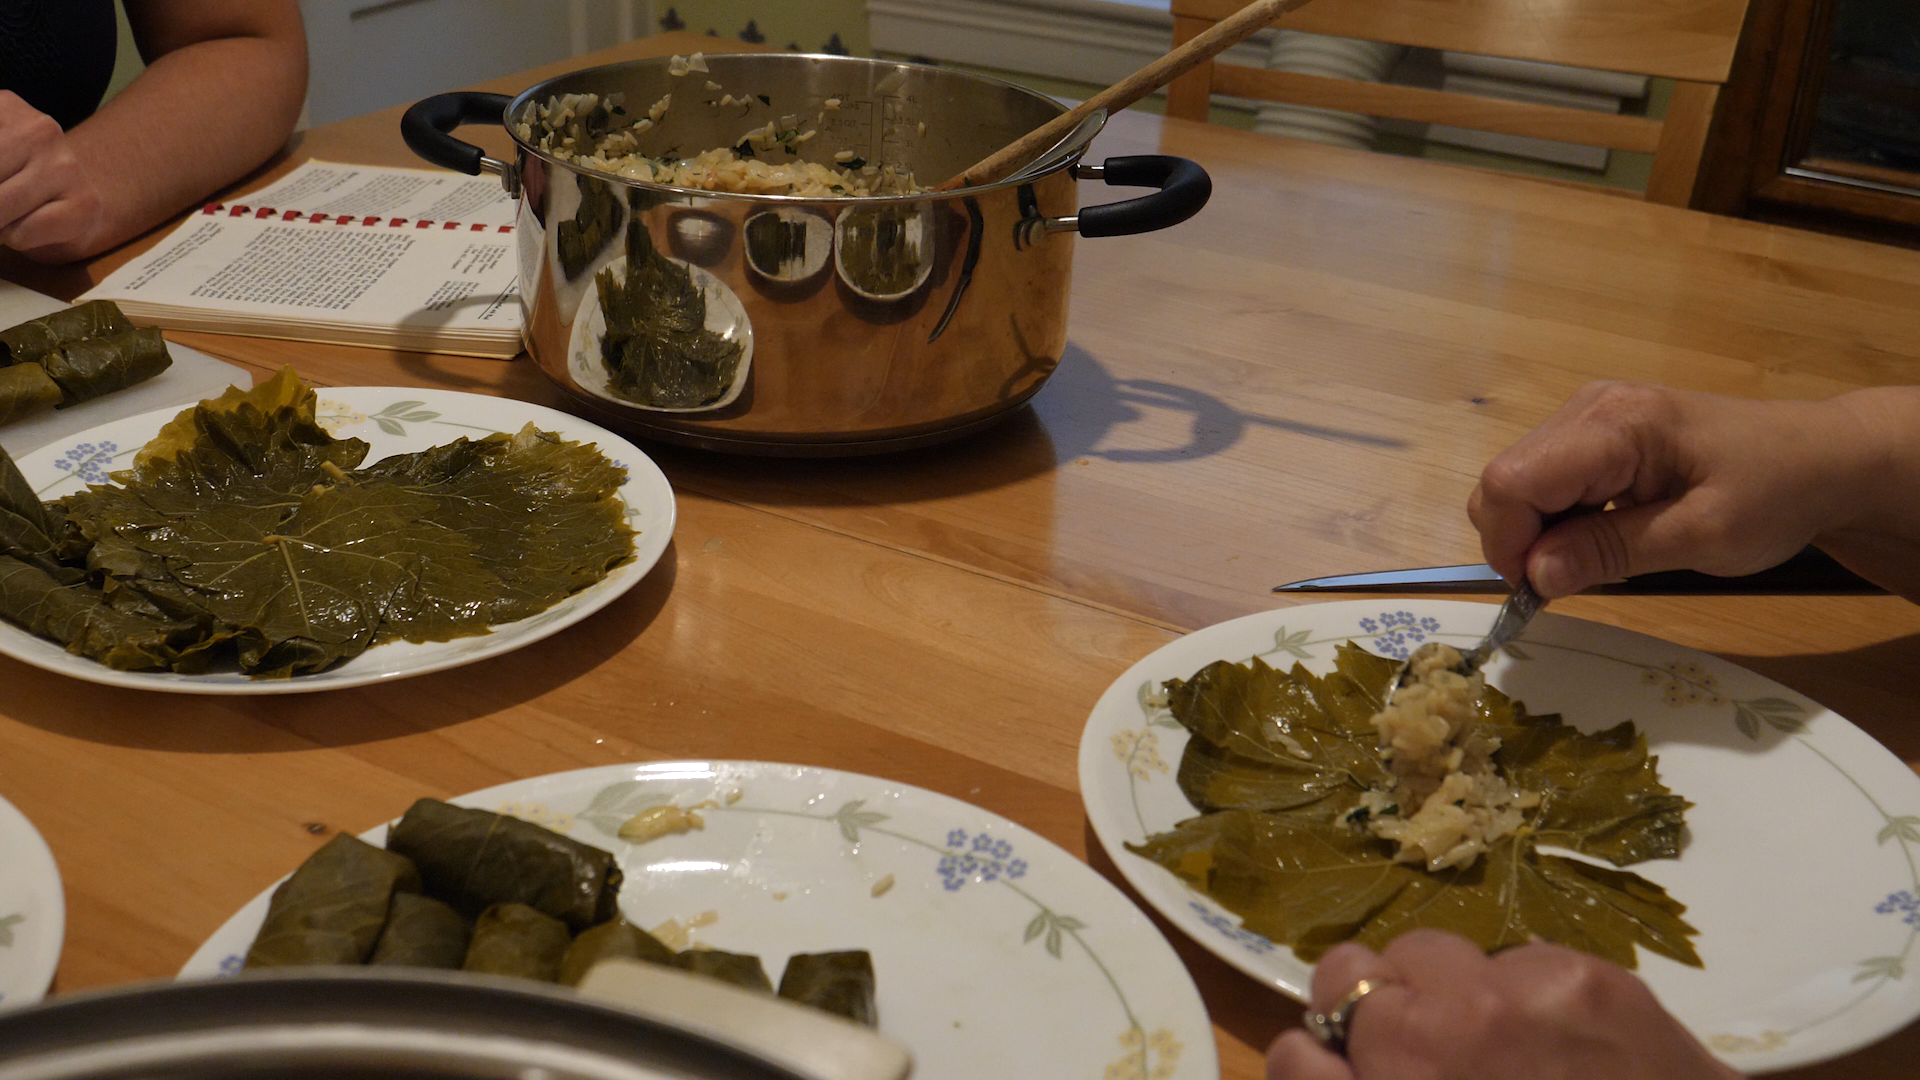 Grape leaves on a table